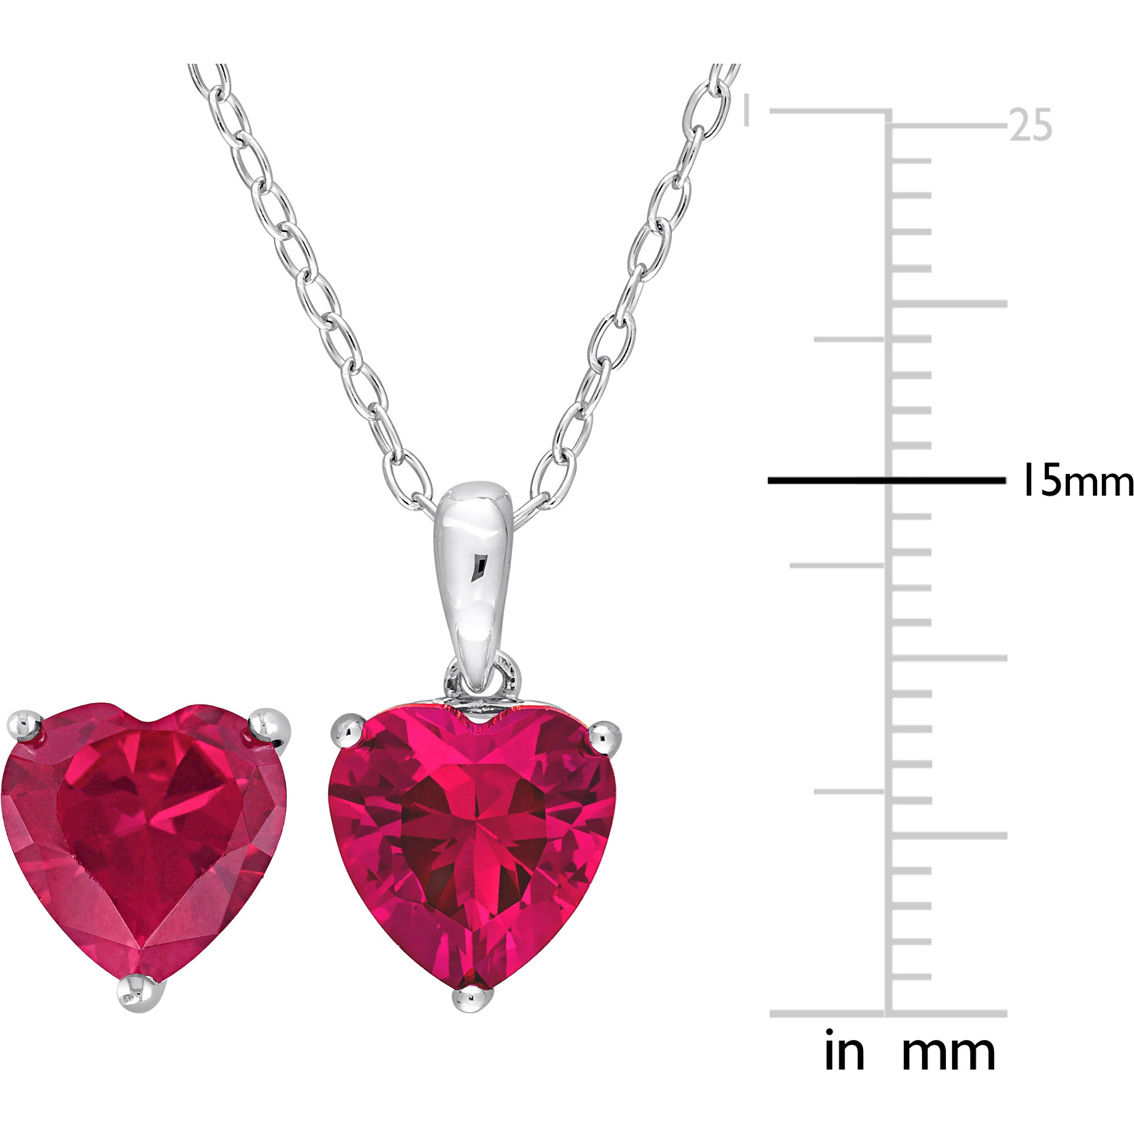 Sofia B. Sterling Silver Heart Created Ruby Solitaire Necklace and Earrings - Image 4 of 4